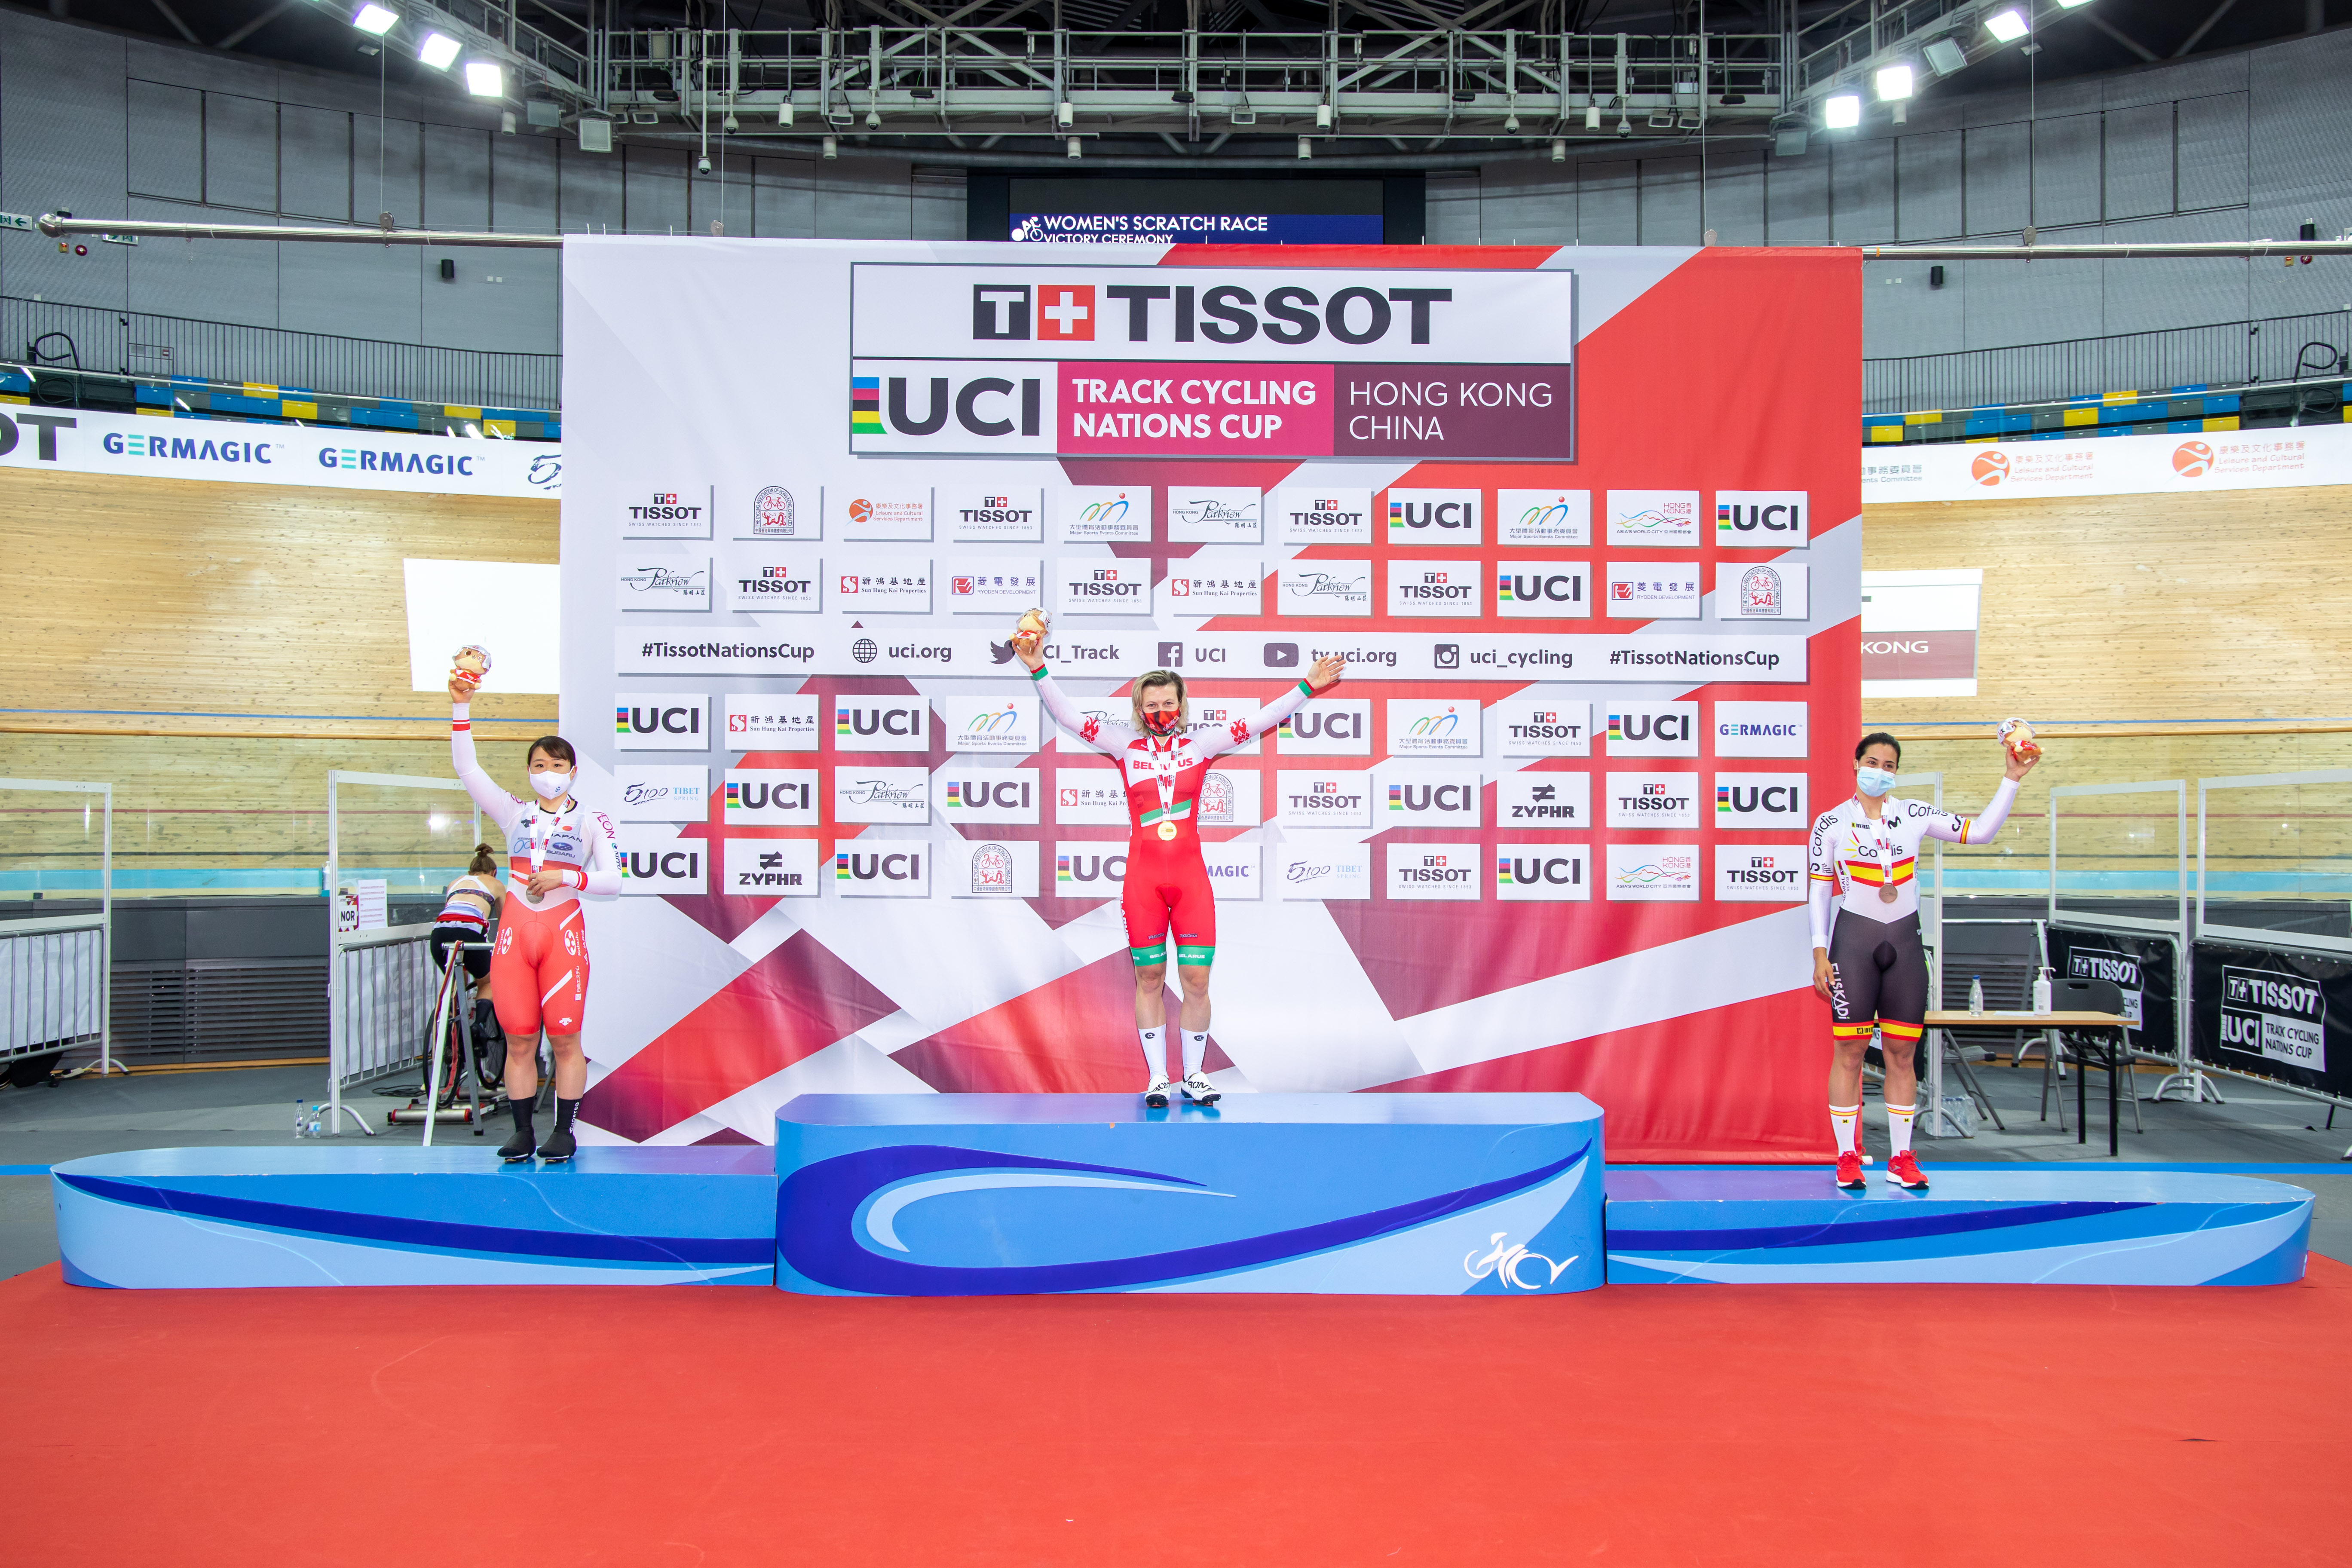 Belarusian riders won 3 gold medals at the 2021 TISSOT Track Cycling Nations Cup stage 